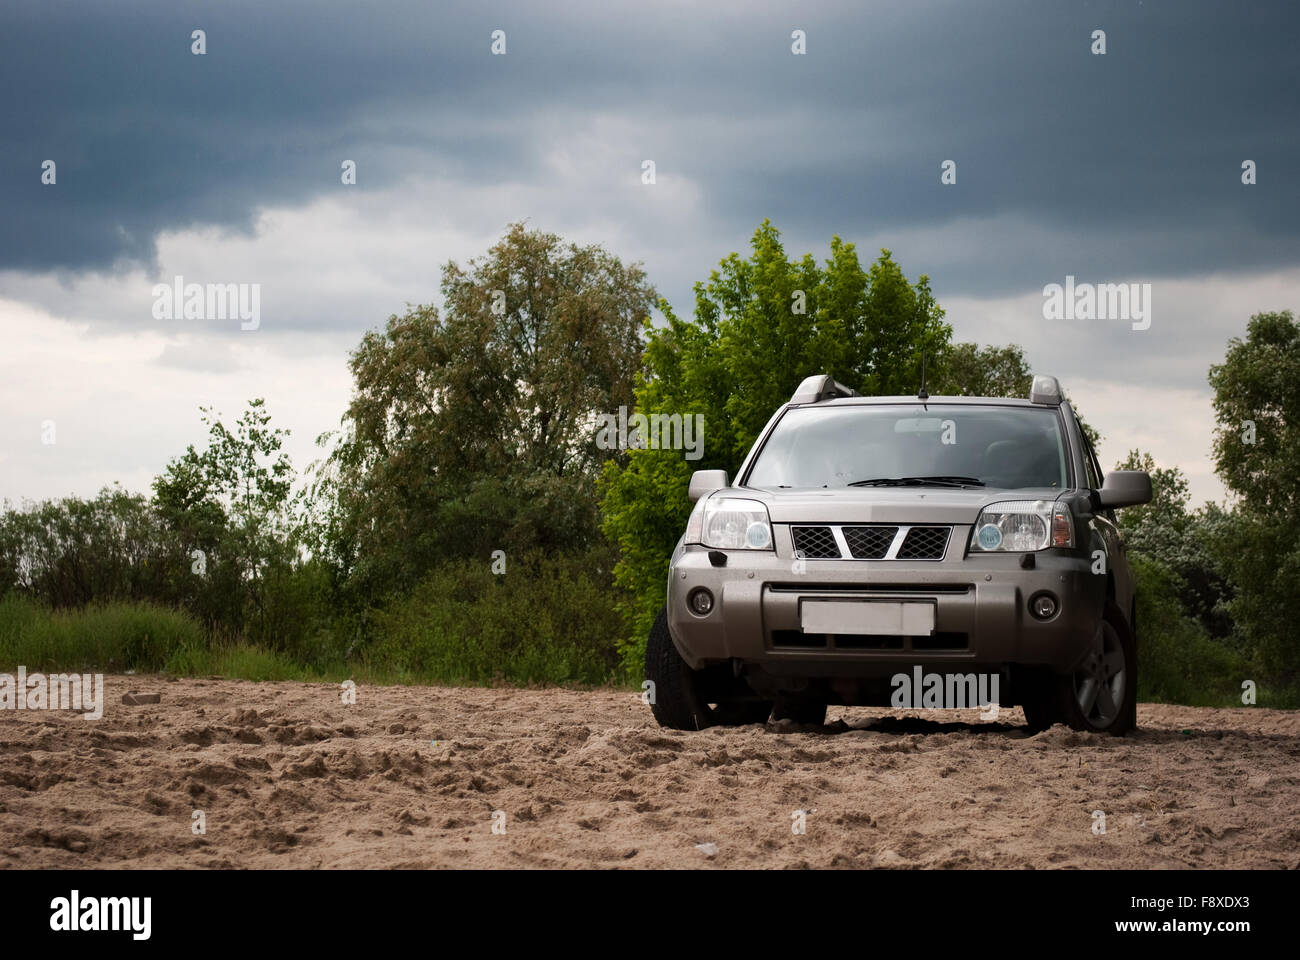 Large SUV in its midst Stock Photo